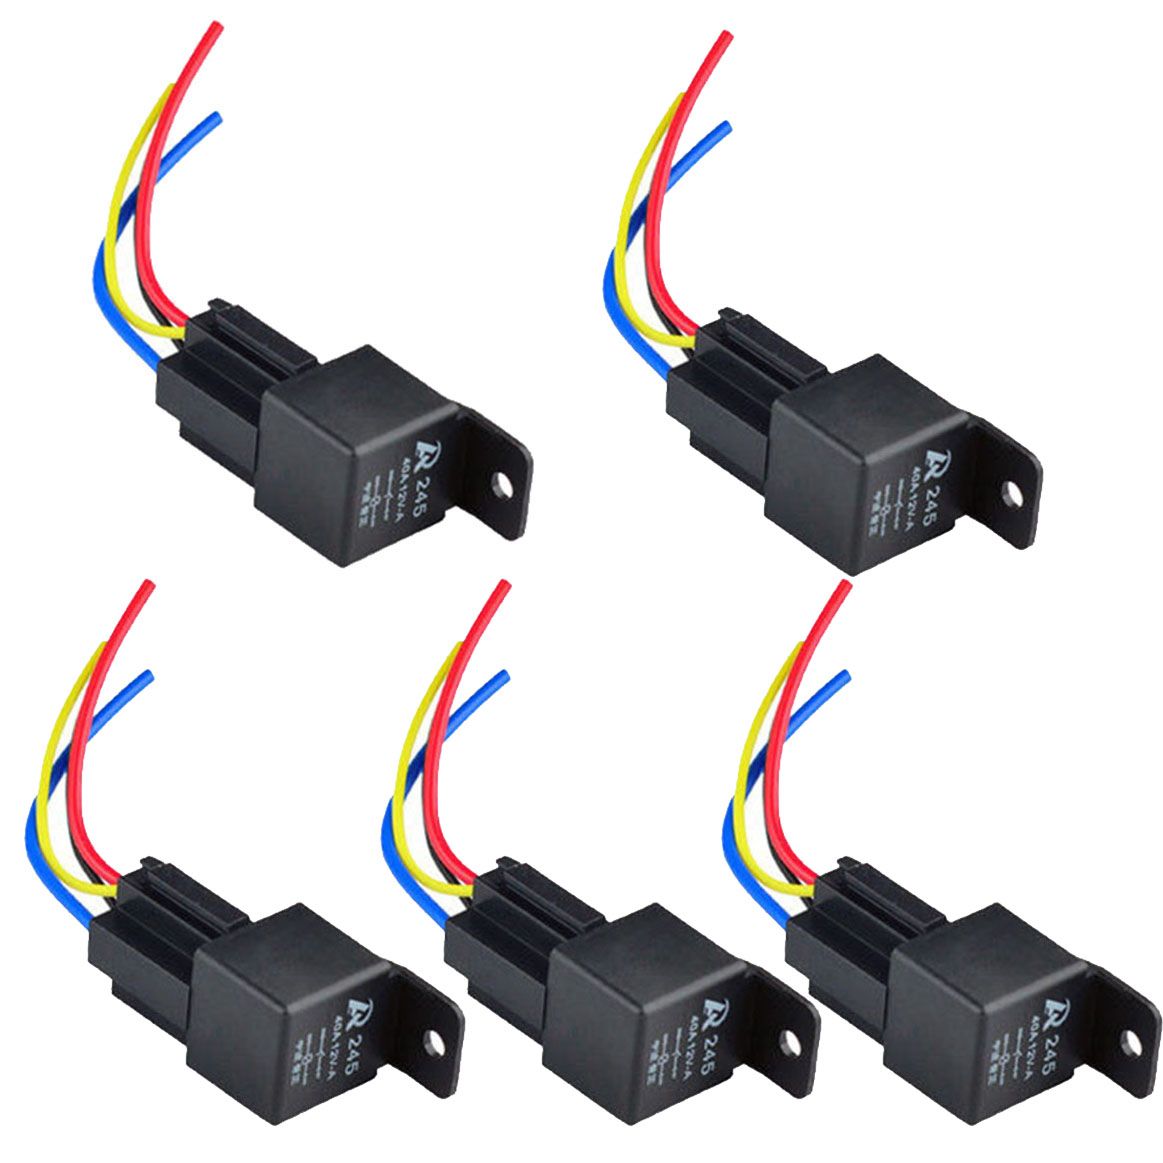 12V 12Volt 40A Auto Automotive Relay Socket 40 Amp 4 Pin Relay & Wires M00003 VPRD